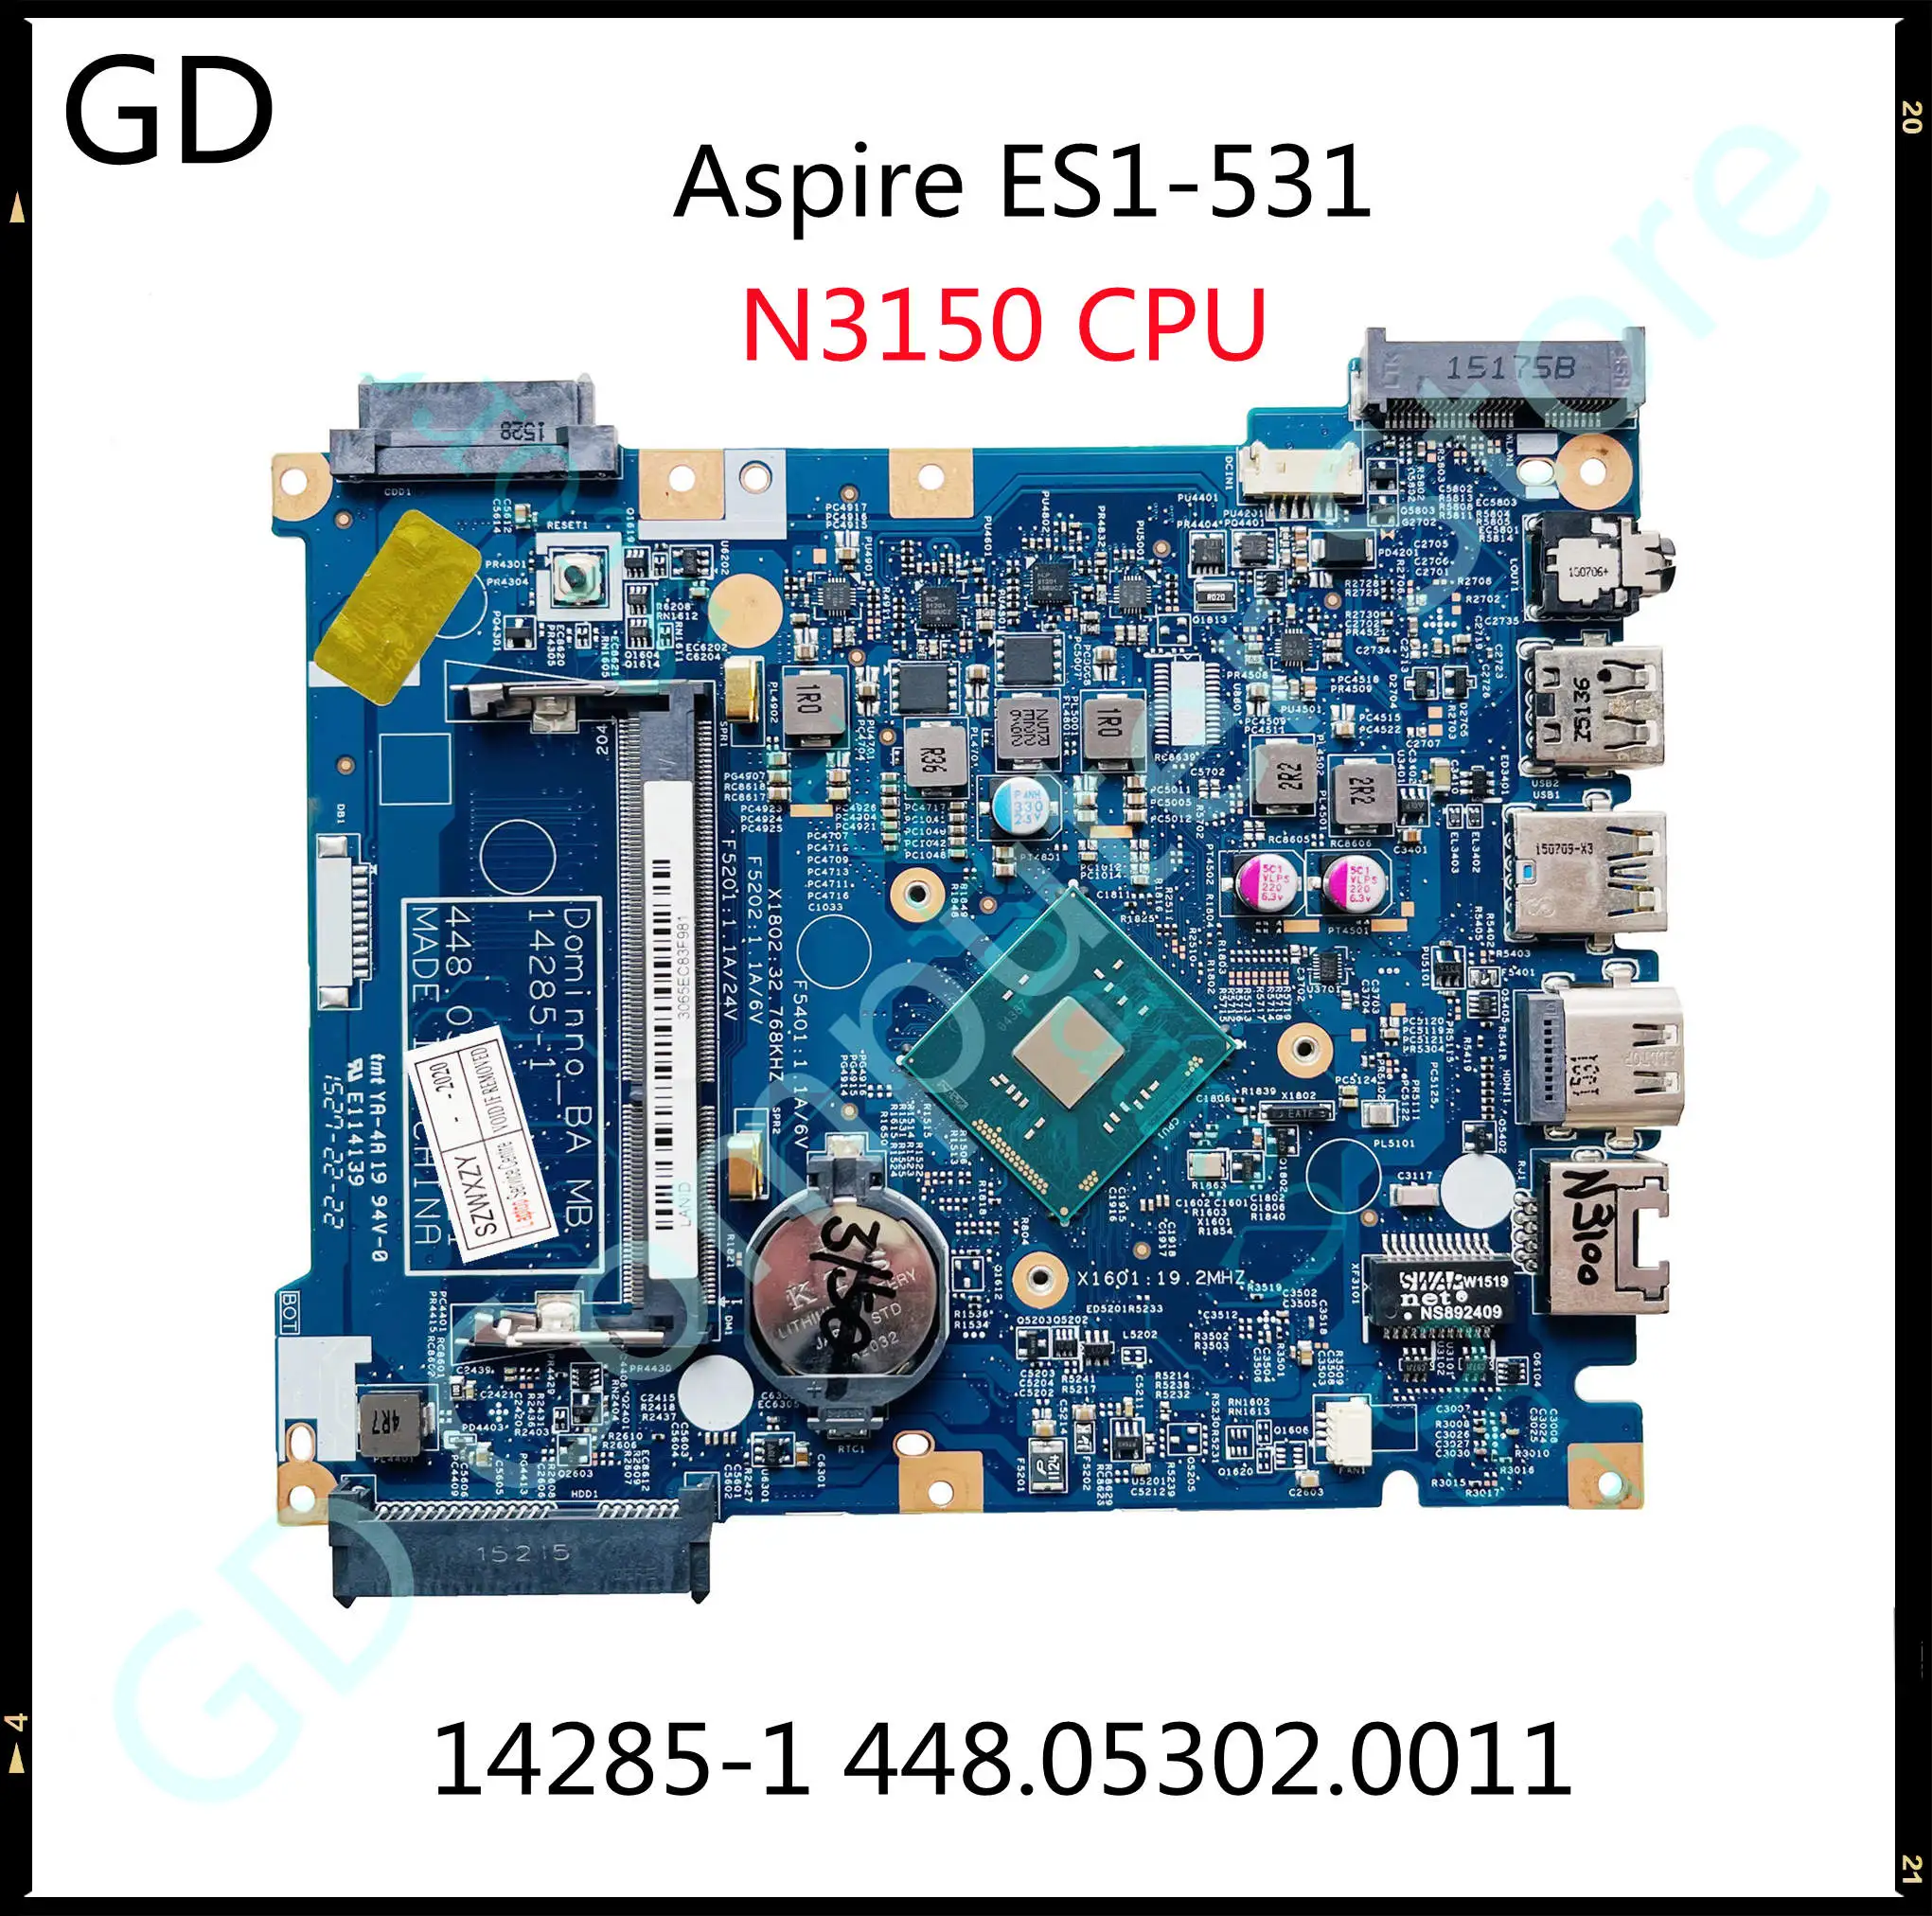 Gd Original For Acer Aspire Es1-531 Laptop Motherboard 14285-1  448.05302.0011 N3150 Cpu Ddr3 Full Tested Fast Shipping - Laptop Motherboard  - AliExpress